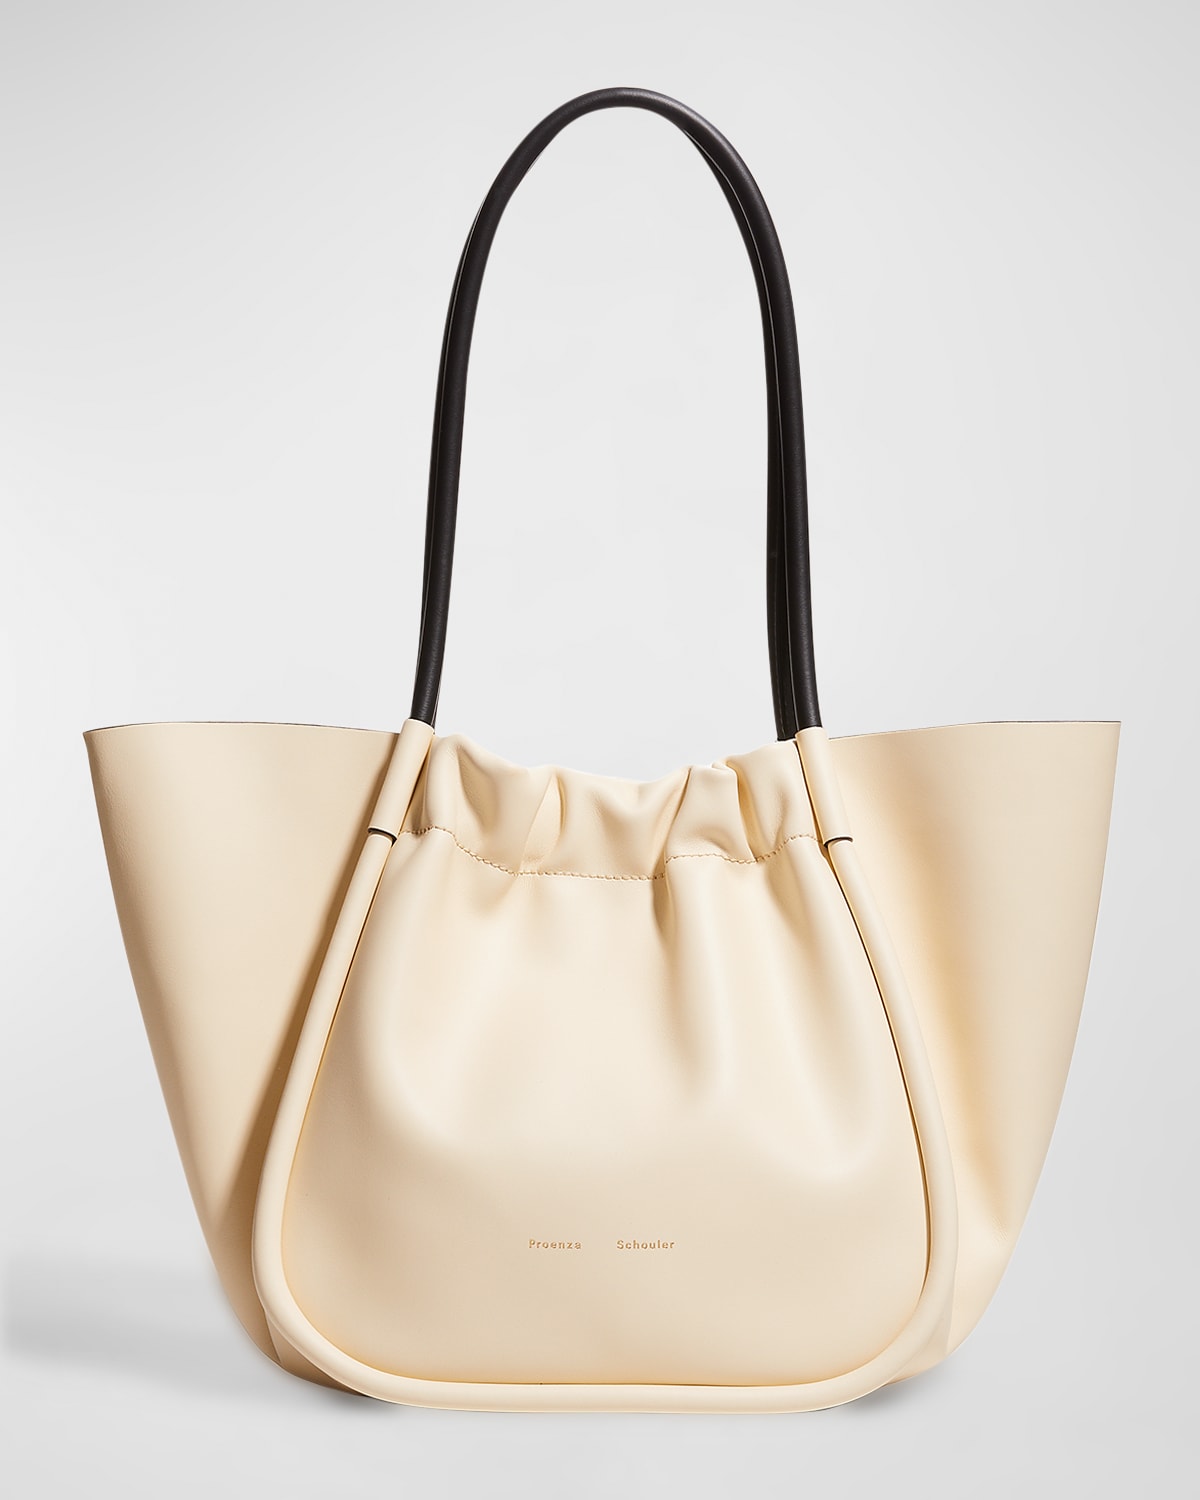 Proenza Schouler Large Ruched Smooth Leather Tote Bag In Pale Sand